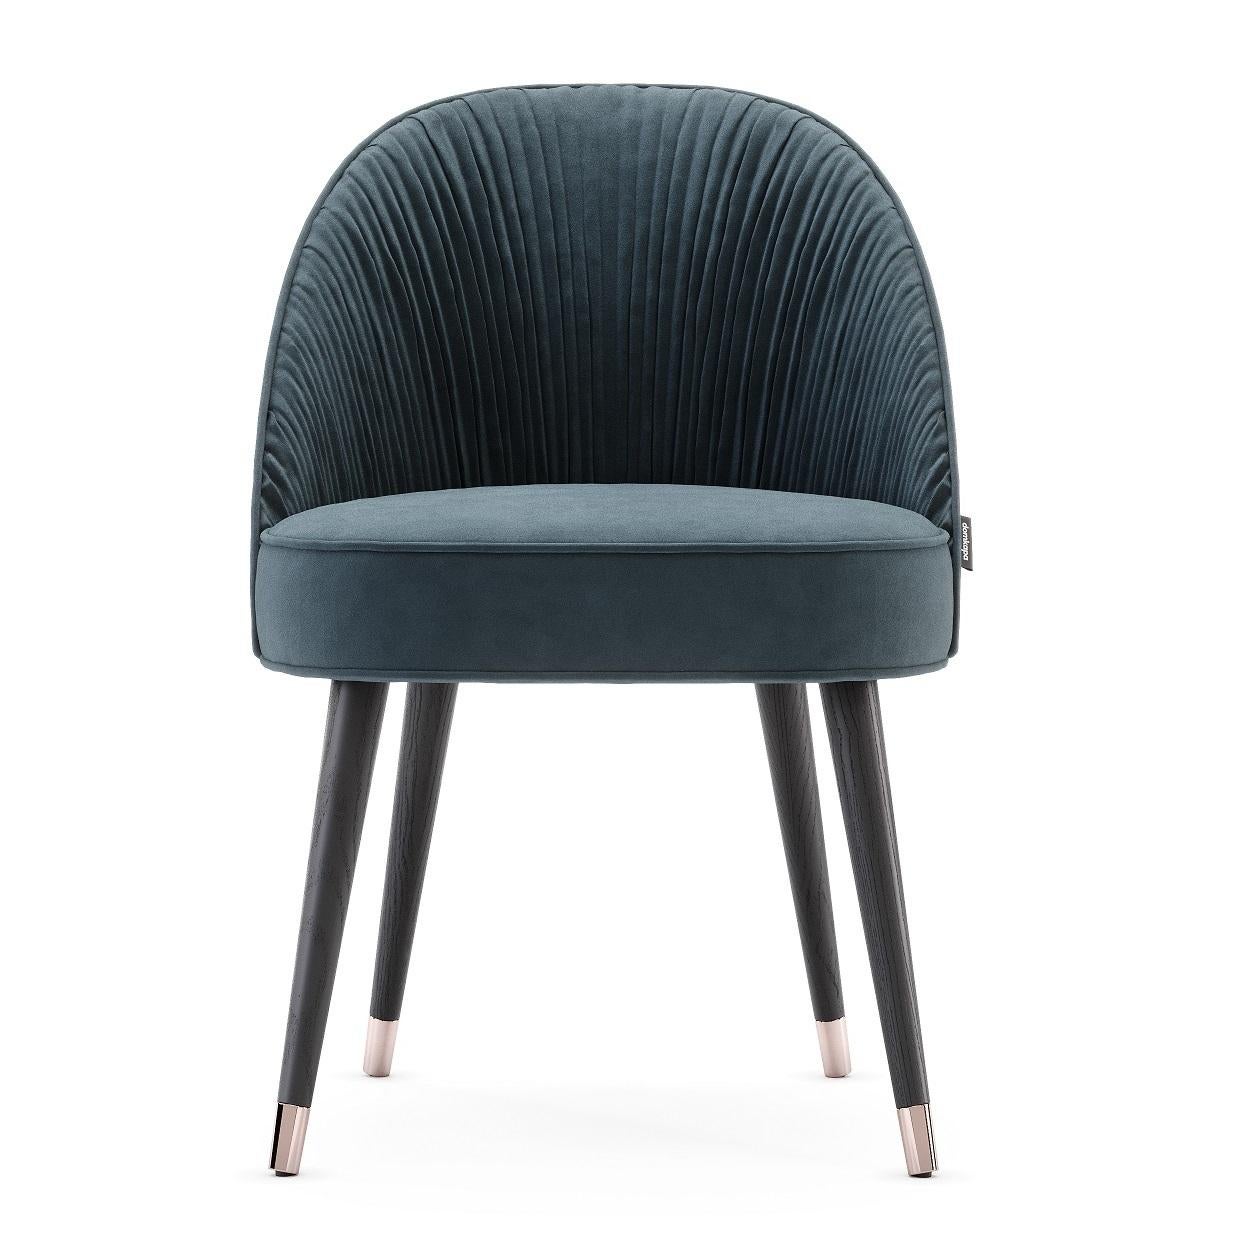 The contemporary dining chairs hold a stimulating design, as they hold an elegant combination of handmade couture techniques, wood, and metal. Their shapes are inspired by the unique French couture and each detail will elegantly flow inside of an